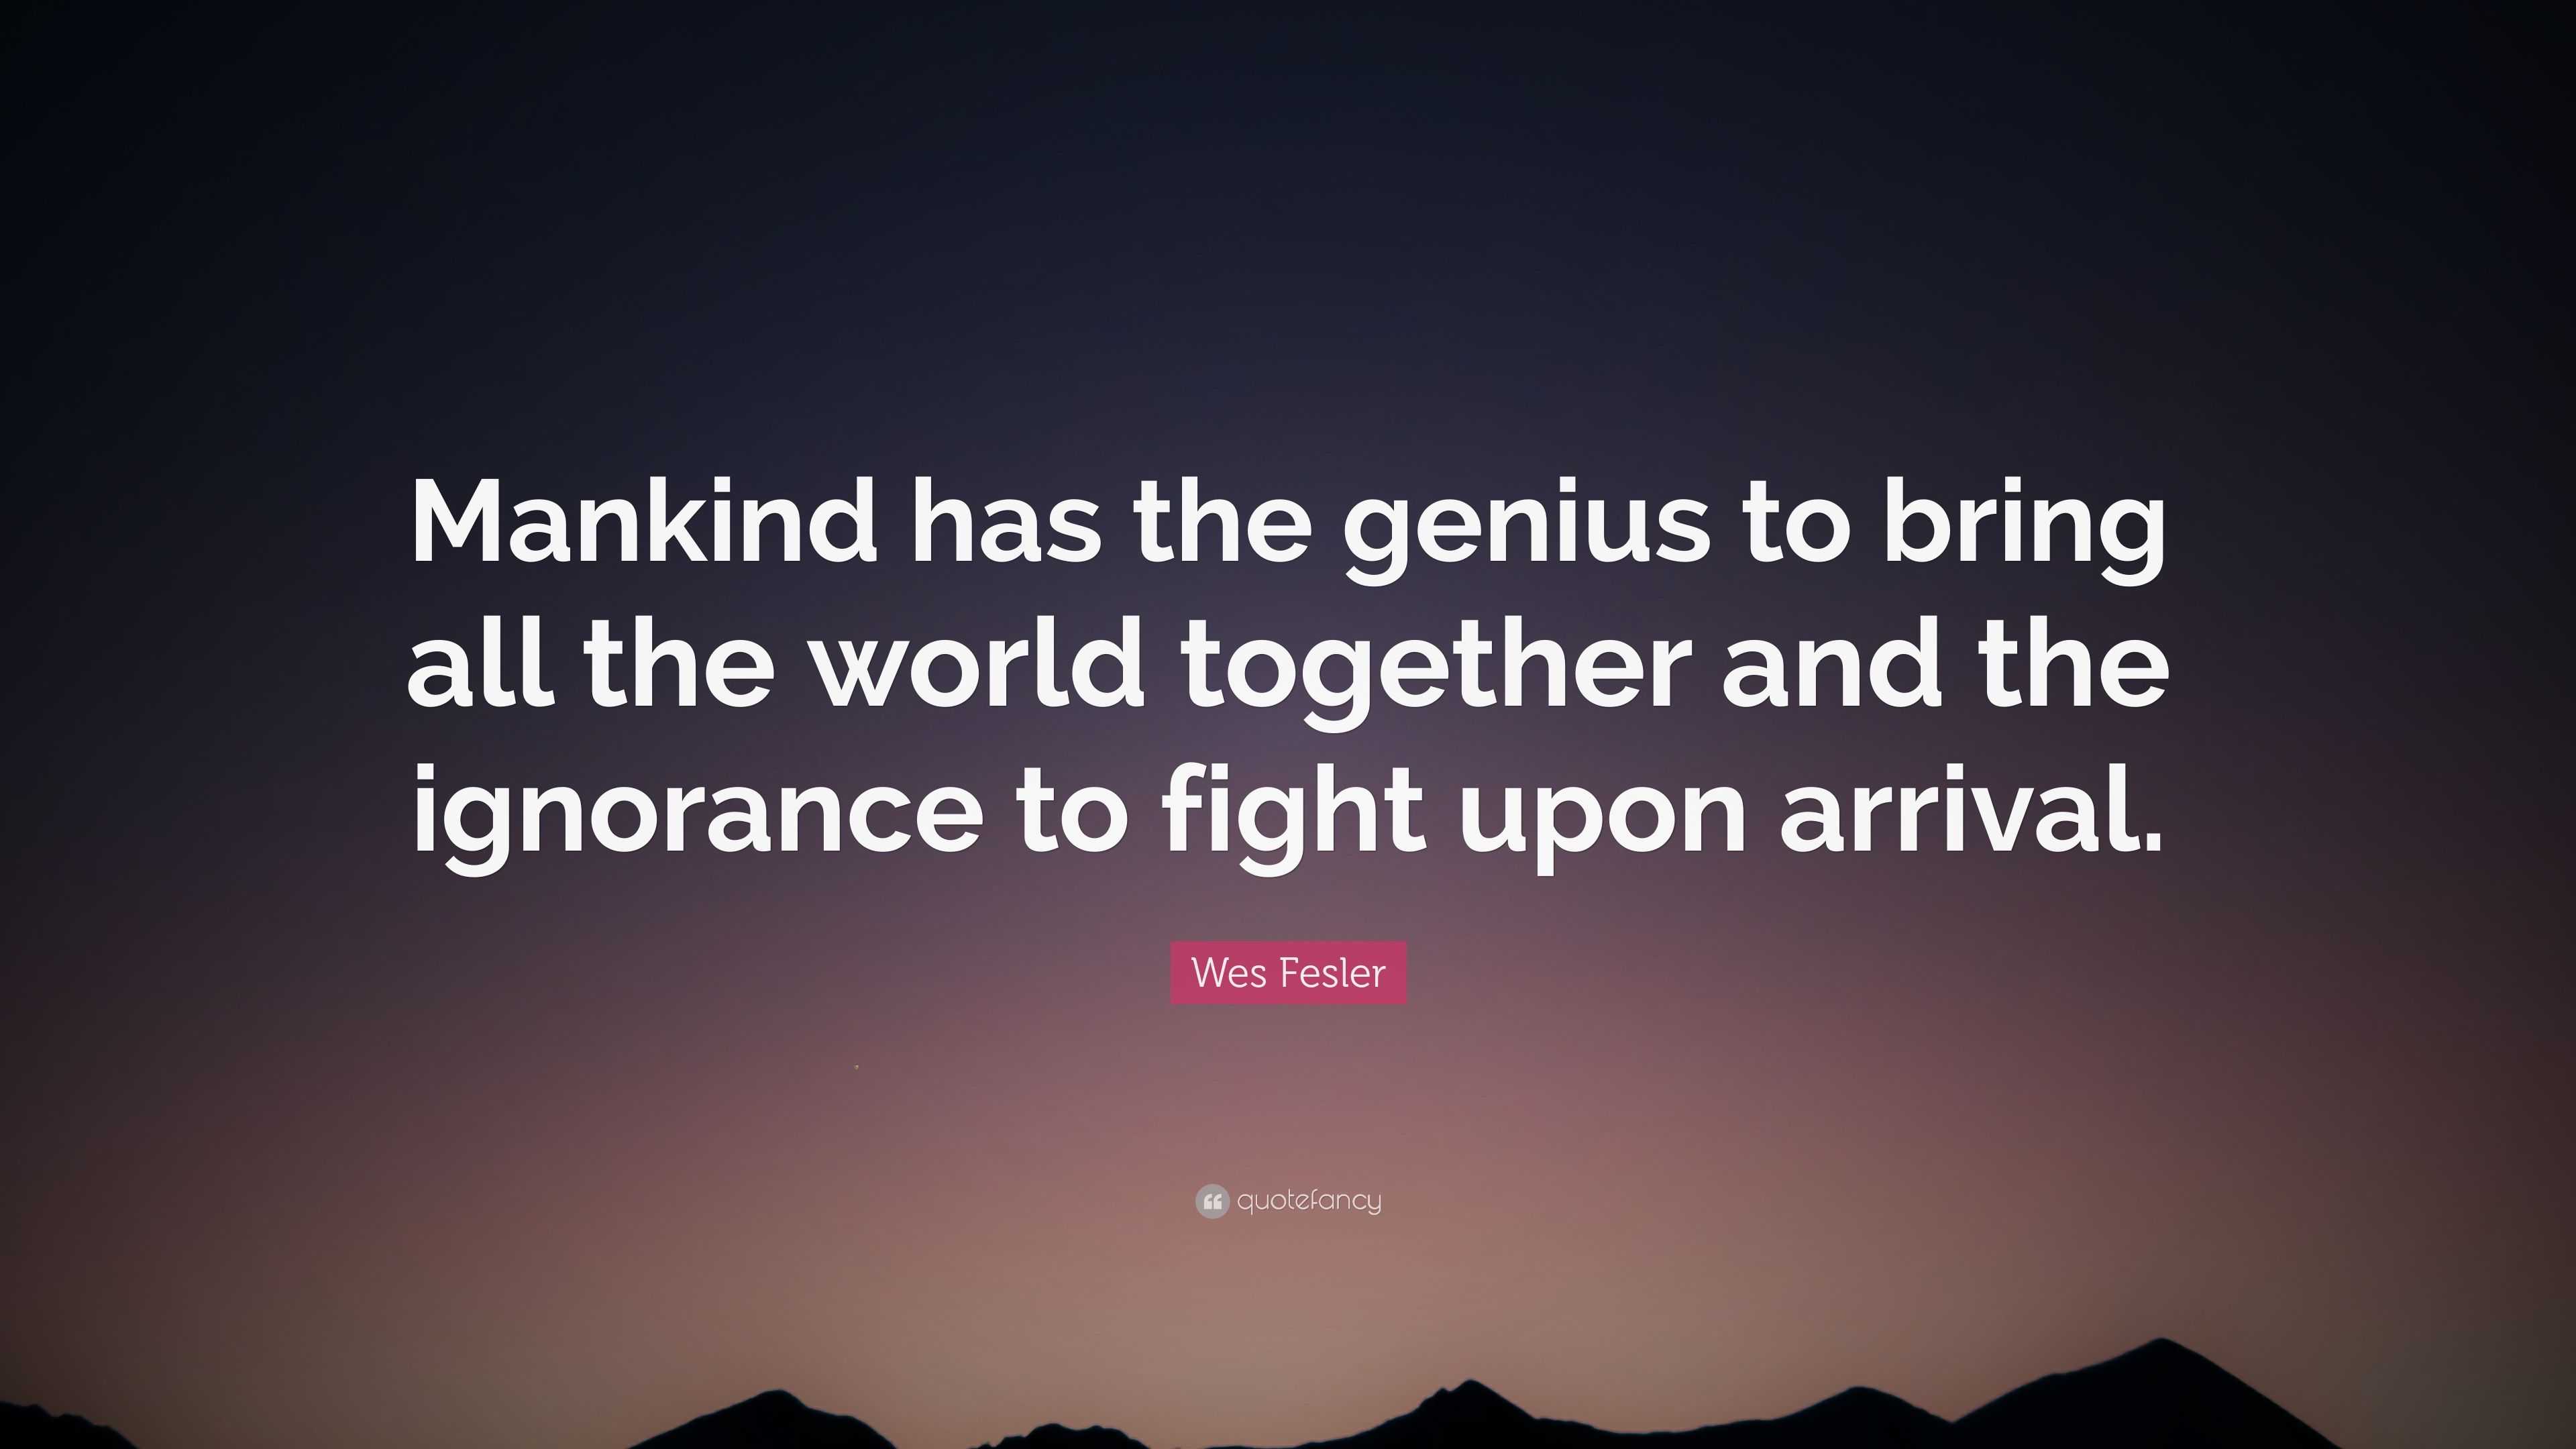 Wes Fesler Quote: “Mankind has the genius to bring all the world ...